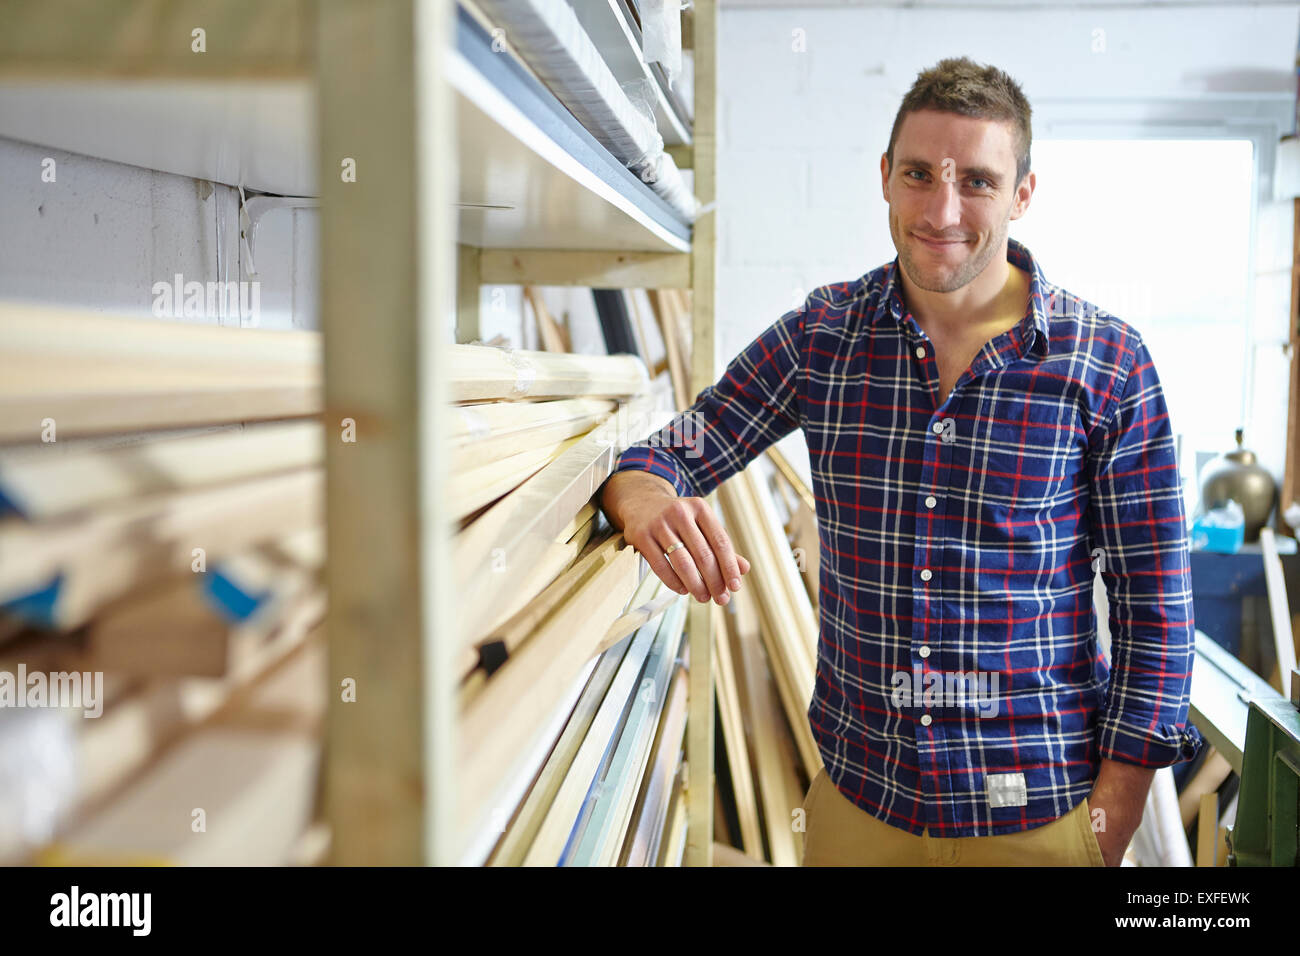 Portrait of mid adult man leaning against shelves in picture framers workshop Stock Photo